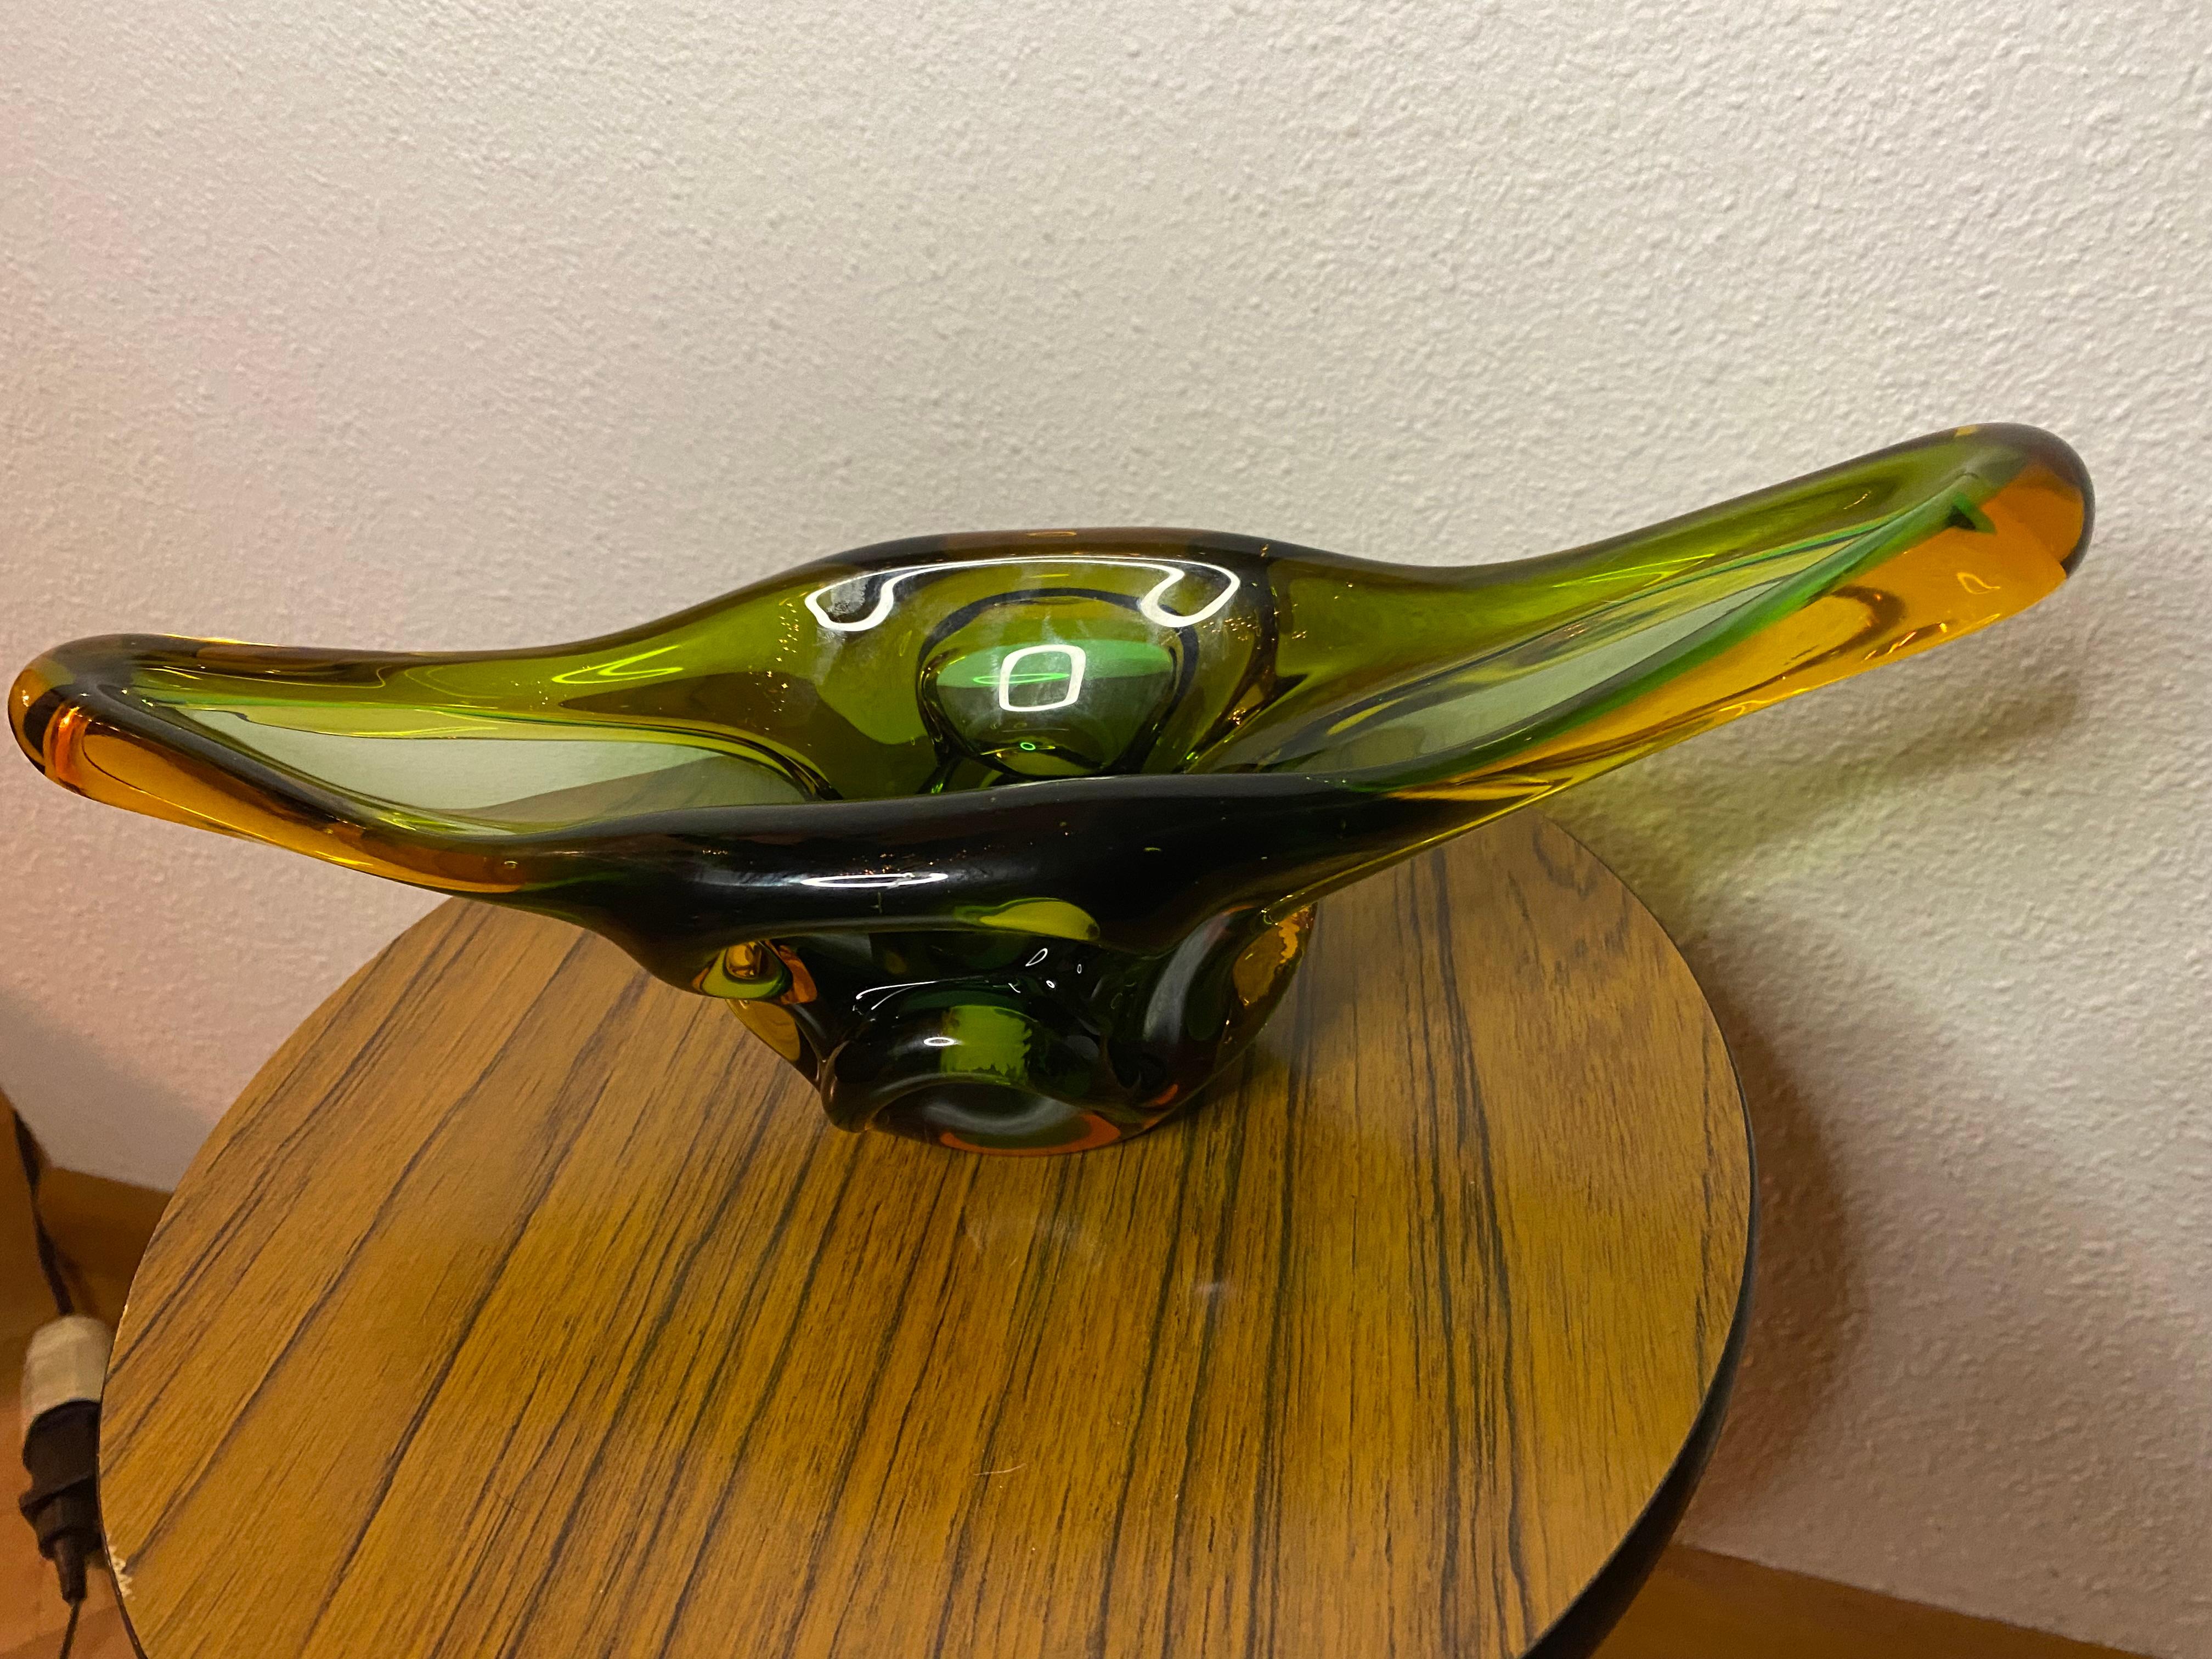 Stunning green and amber colored Murano glass  bowl in a beautiful shape.